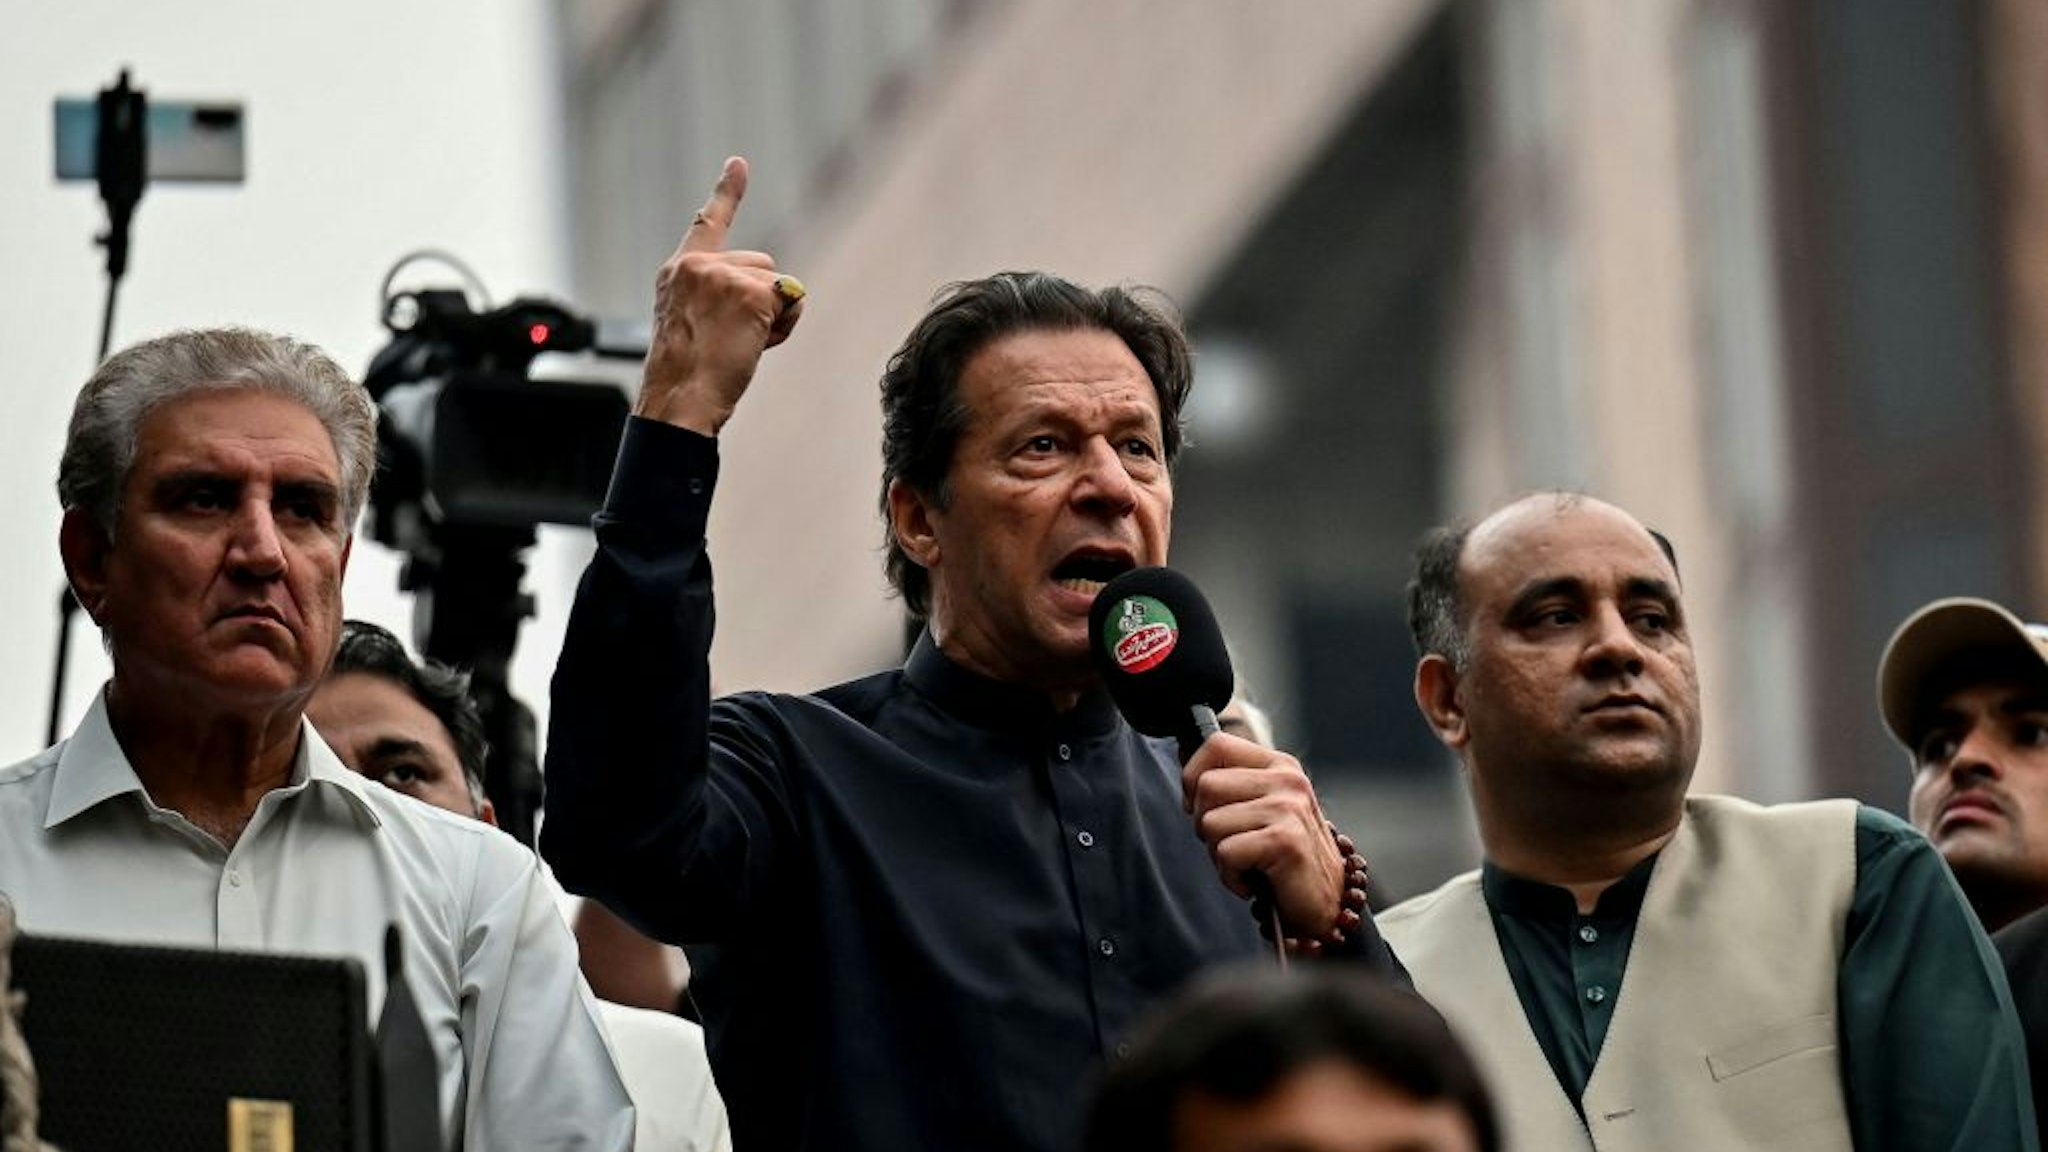 Pakistan's former prime minister Imran Khan (C) addresses his supporters during an anti-government march towards capital Islamabad, demanding early elections, in Gujranwala on November 1, 2022.